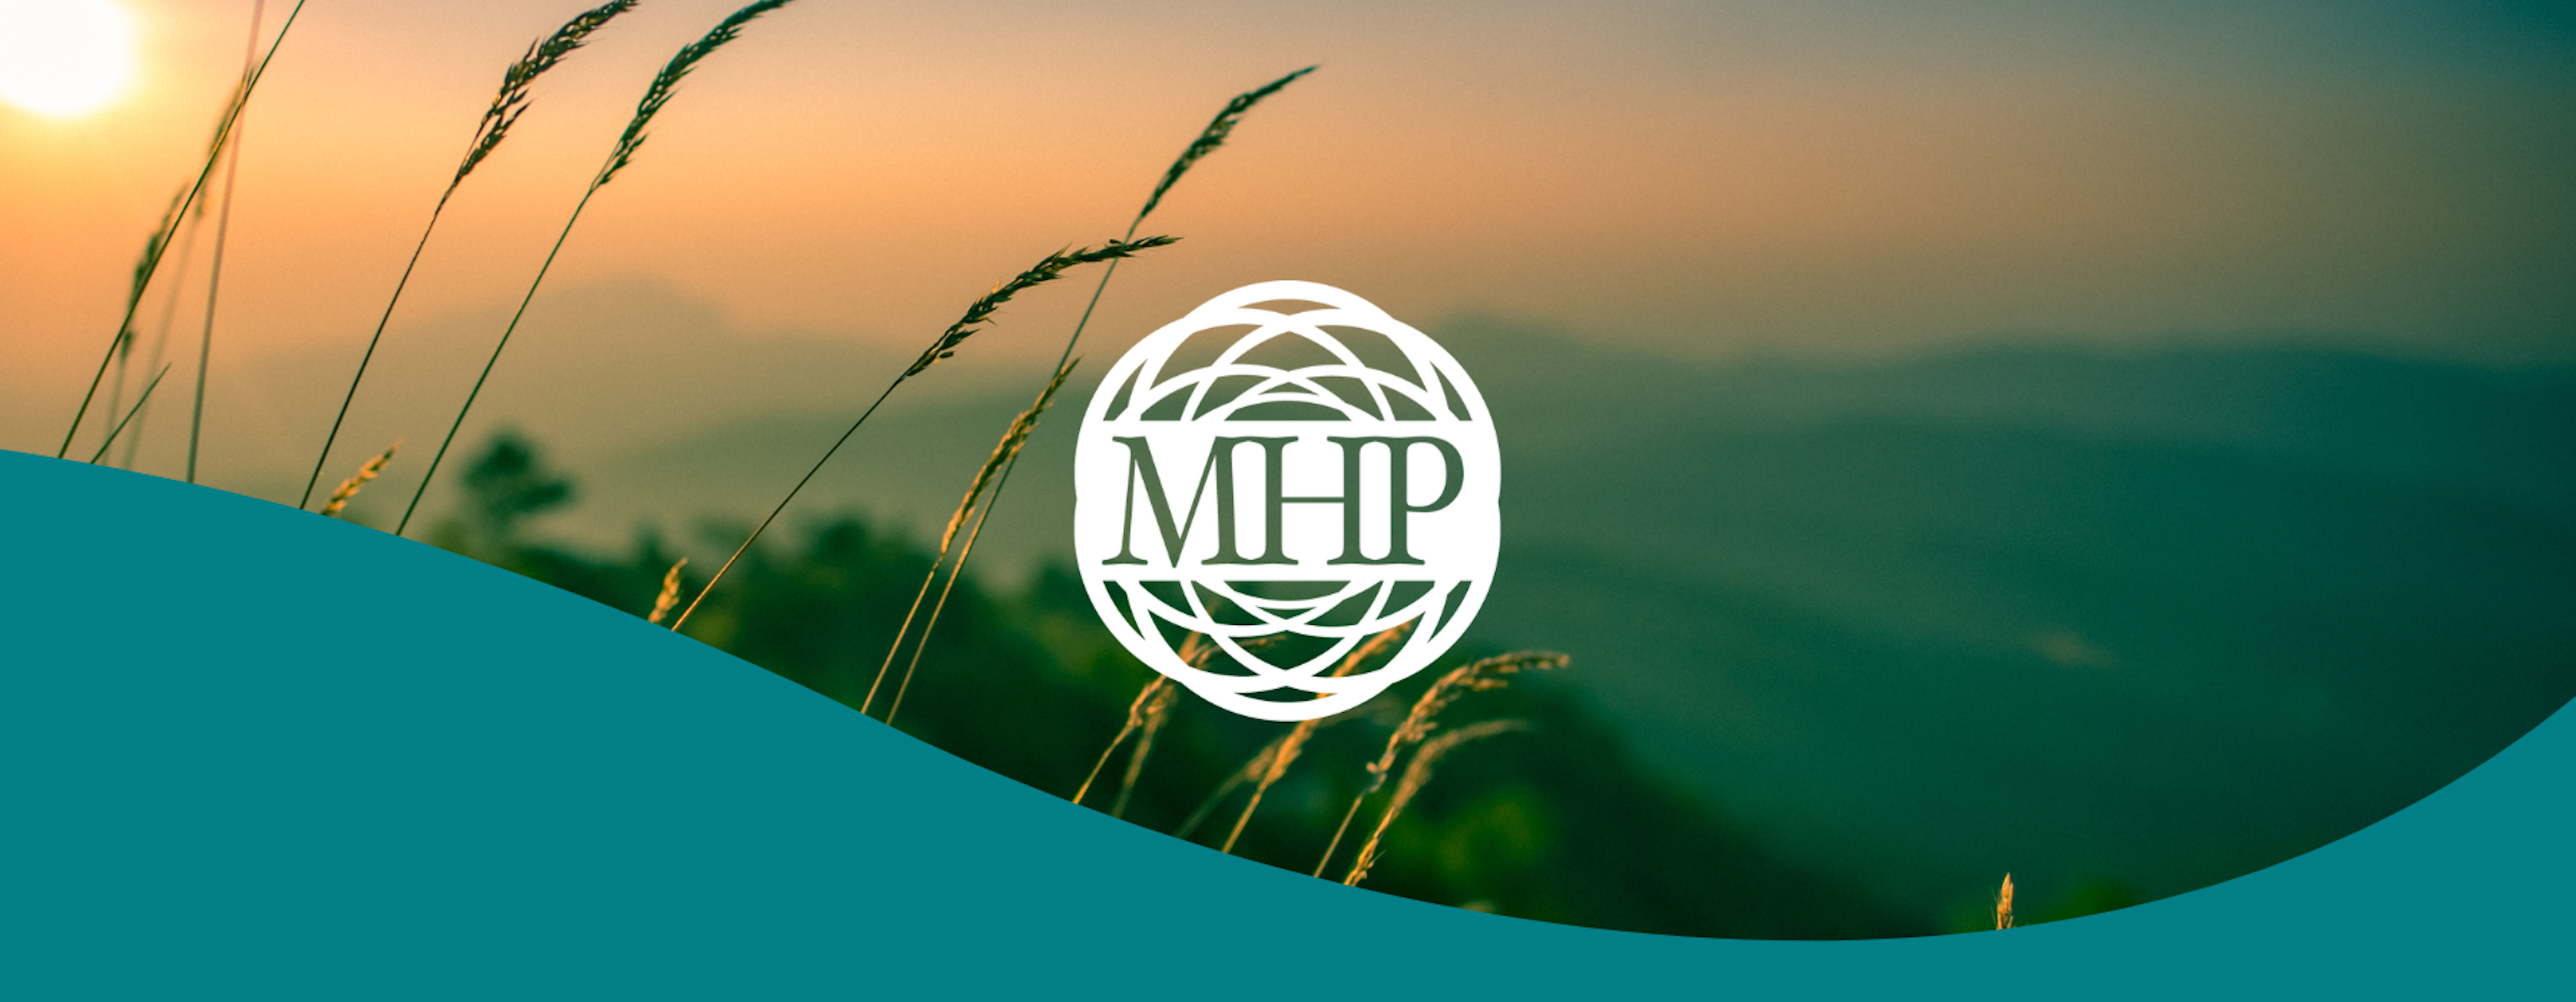 Ptsd Tips Sunset Over Mountains With Mhp Logo